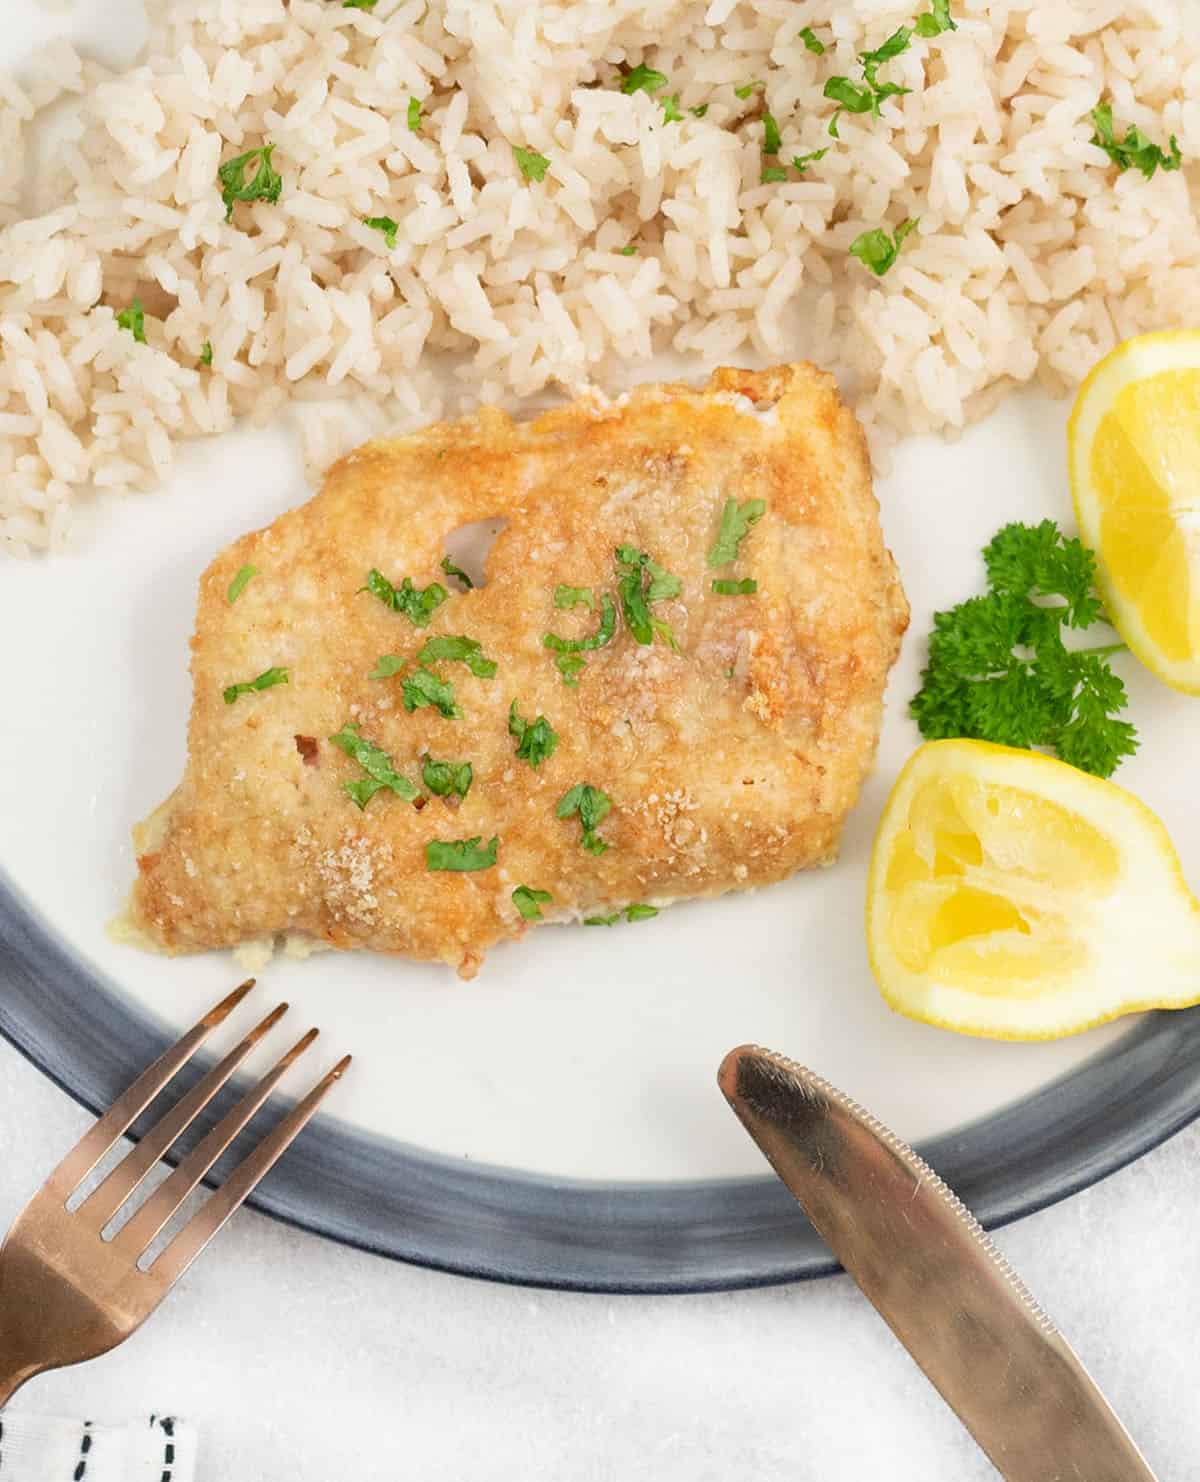 crispy baked cod with parmesan along with lemon wedge and white rice.